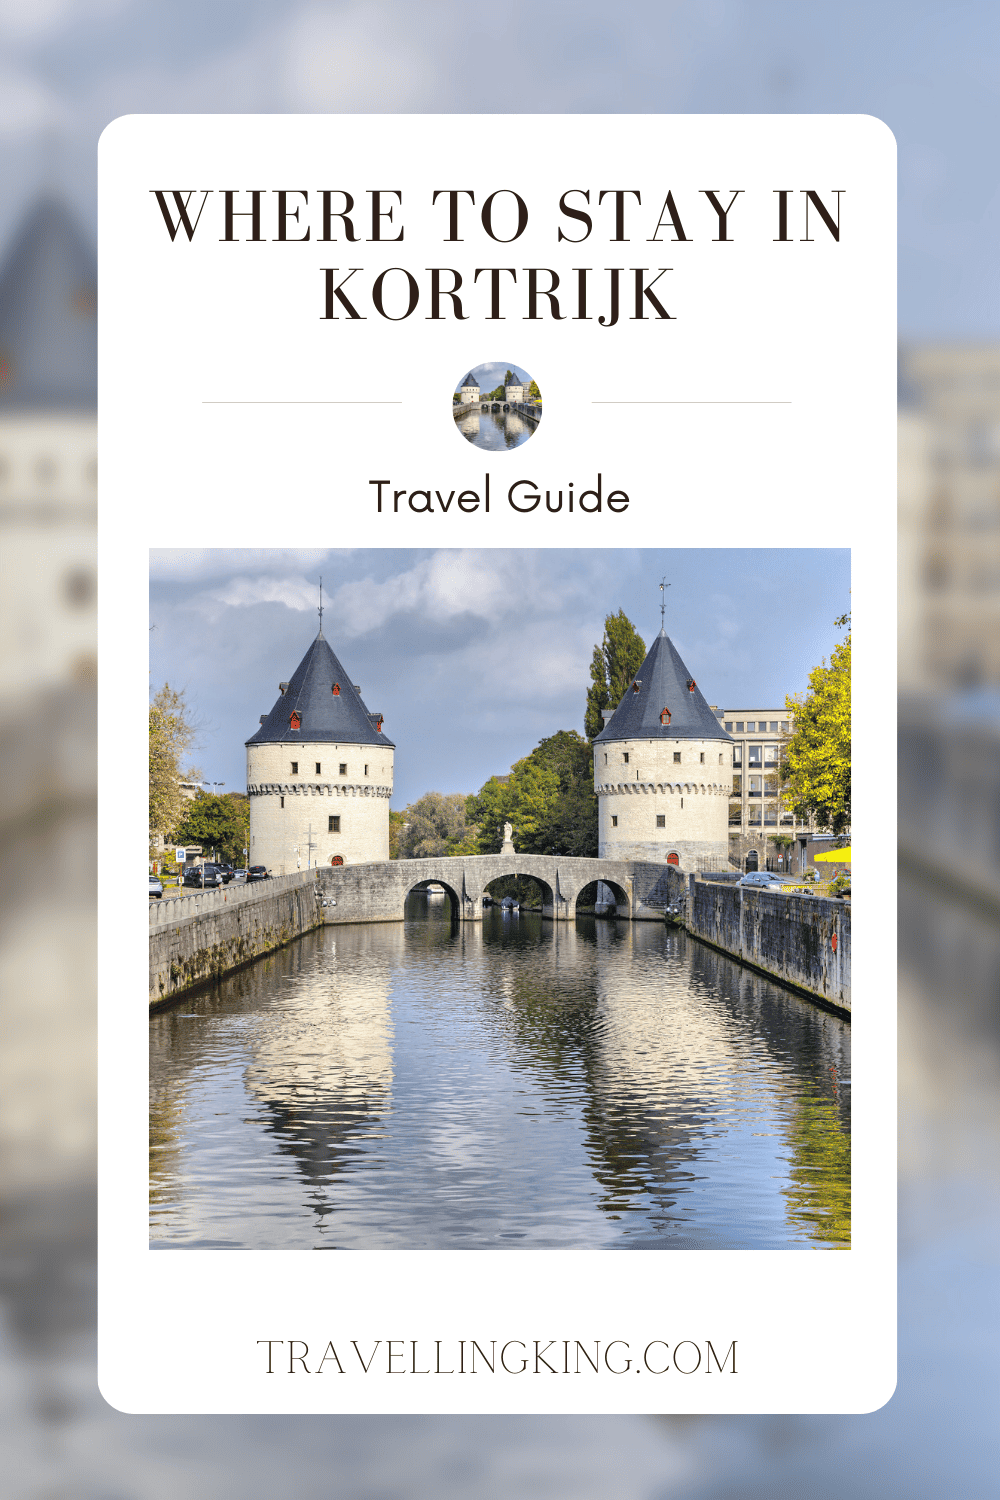 Where to stay in Kortrijk